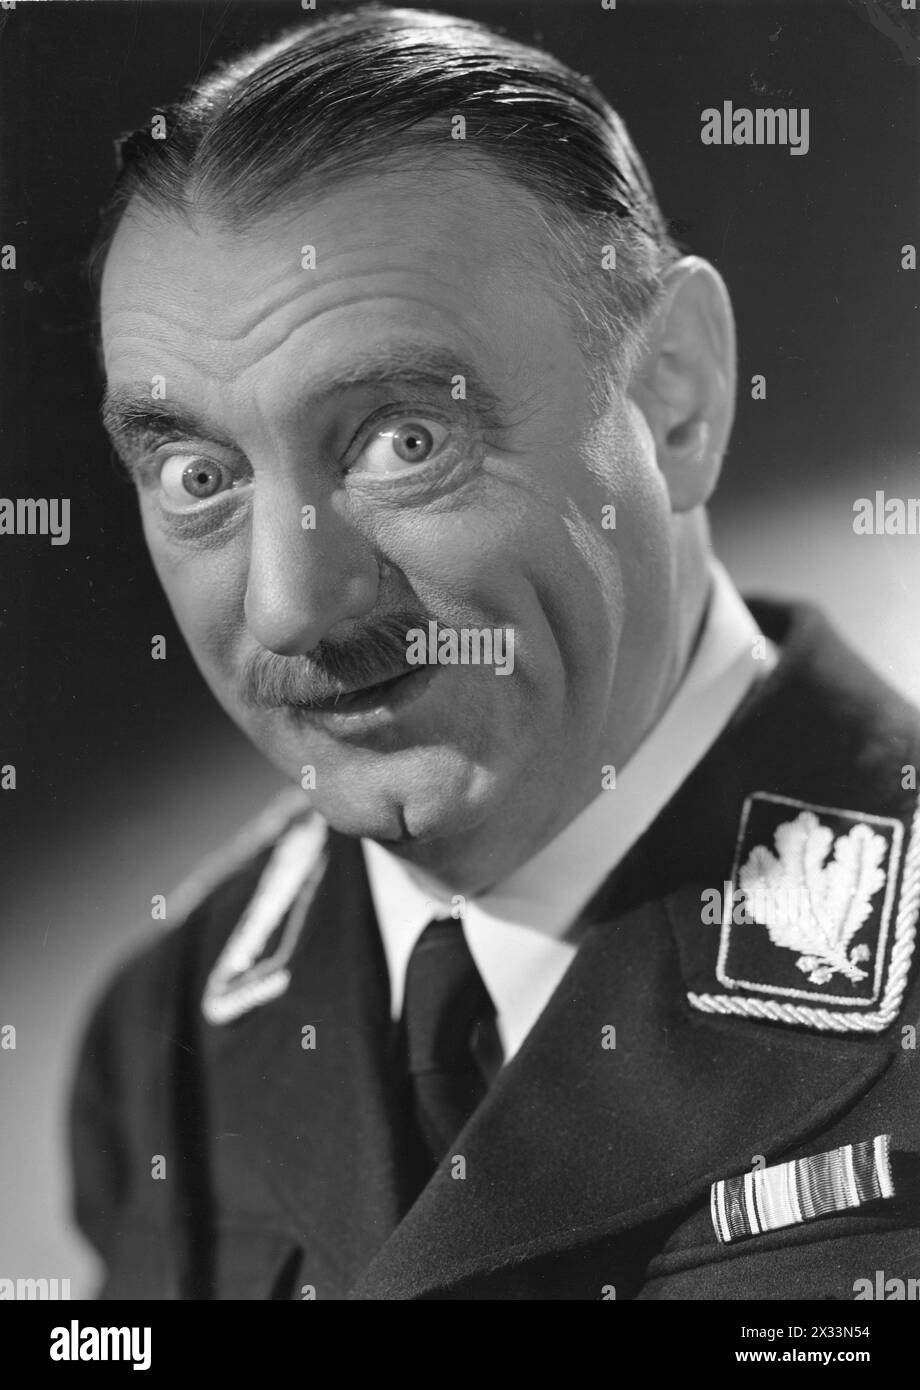 German character actor SIG RUMAN in a publicity portrait as Colonel Ehrhardt from TO BE OR NOT TO BE 1942 Produced and Directed by ERNST LUBITSCH Story MELCHIOR LENGYEL Screenplay EDWIN JUSTUS MEYER Costume Design IRENE  (for Carole Lombard) Cinematographer RUDOLPH MATE Production Design VINCENT KORDA  Music WERNER R HEYMANN  Photograph by COBURN  Presented by ALEXANDER KORDA  United Artists Stock Photo